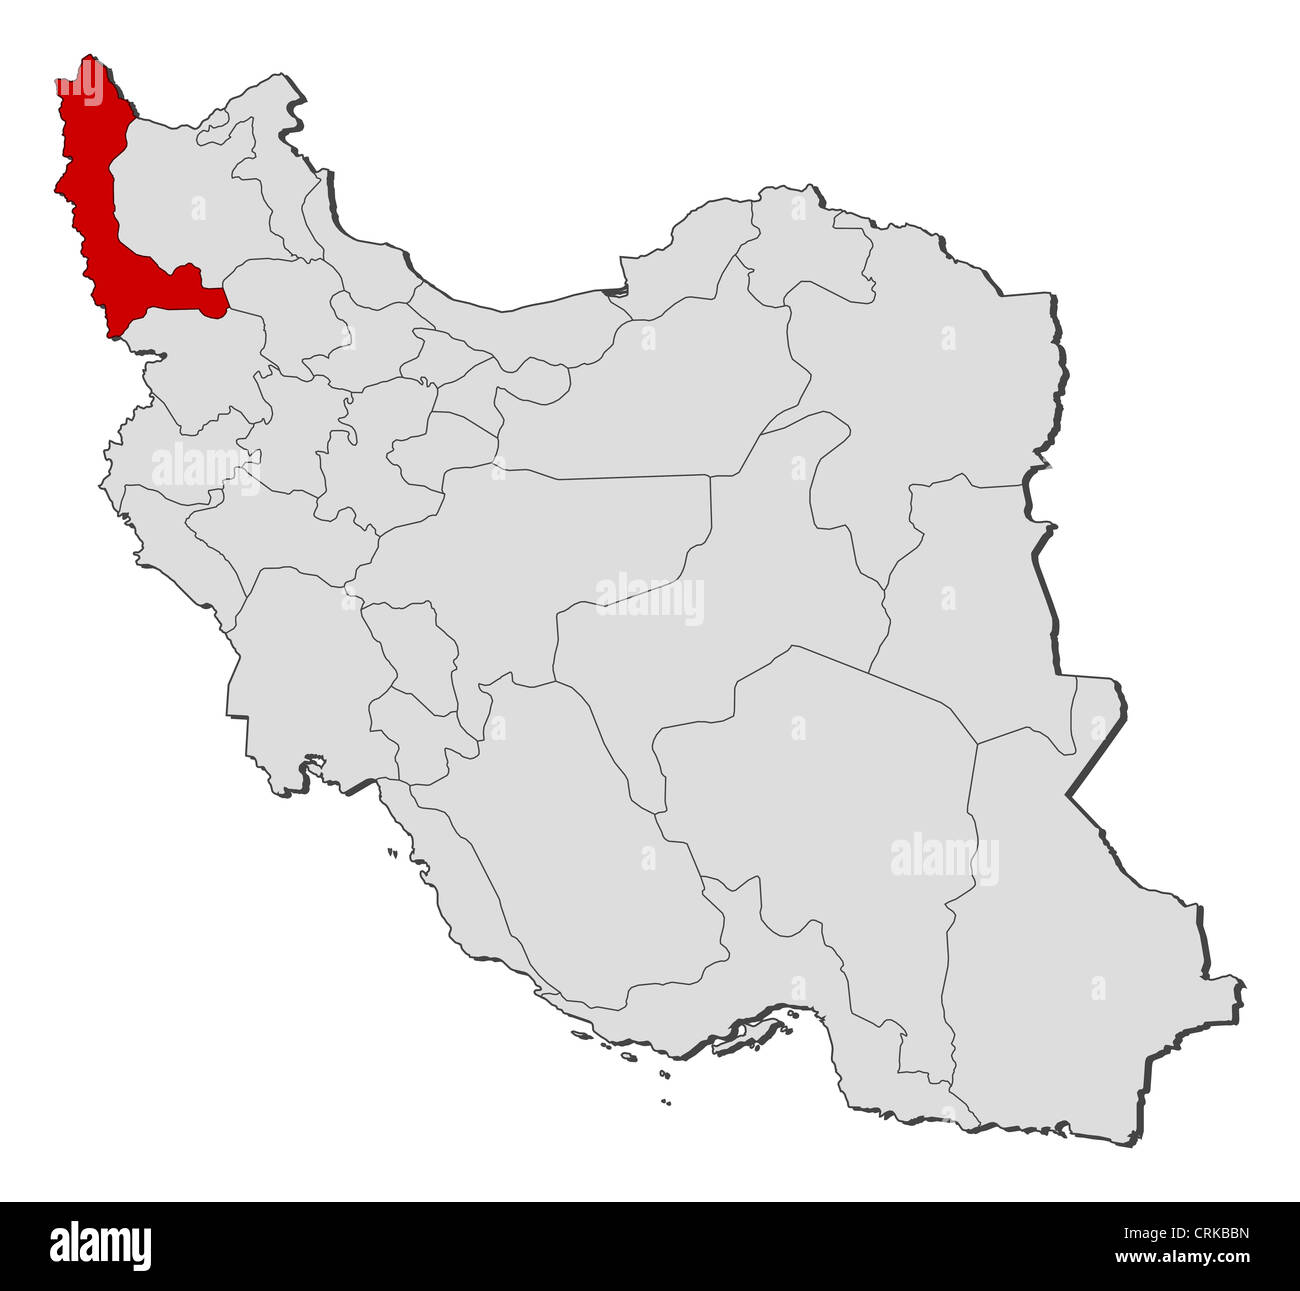 Political map of Iran with the several provinces where West Azerbaijan is highlighted. Stock Photo